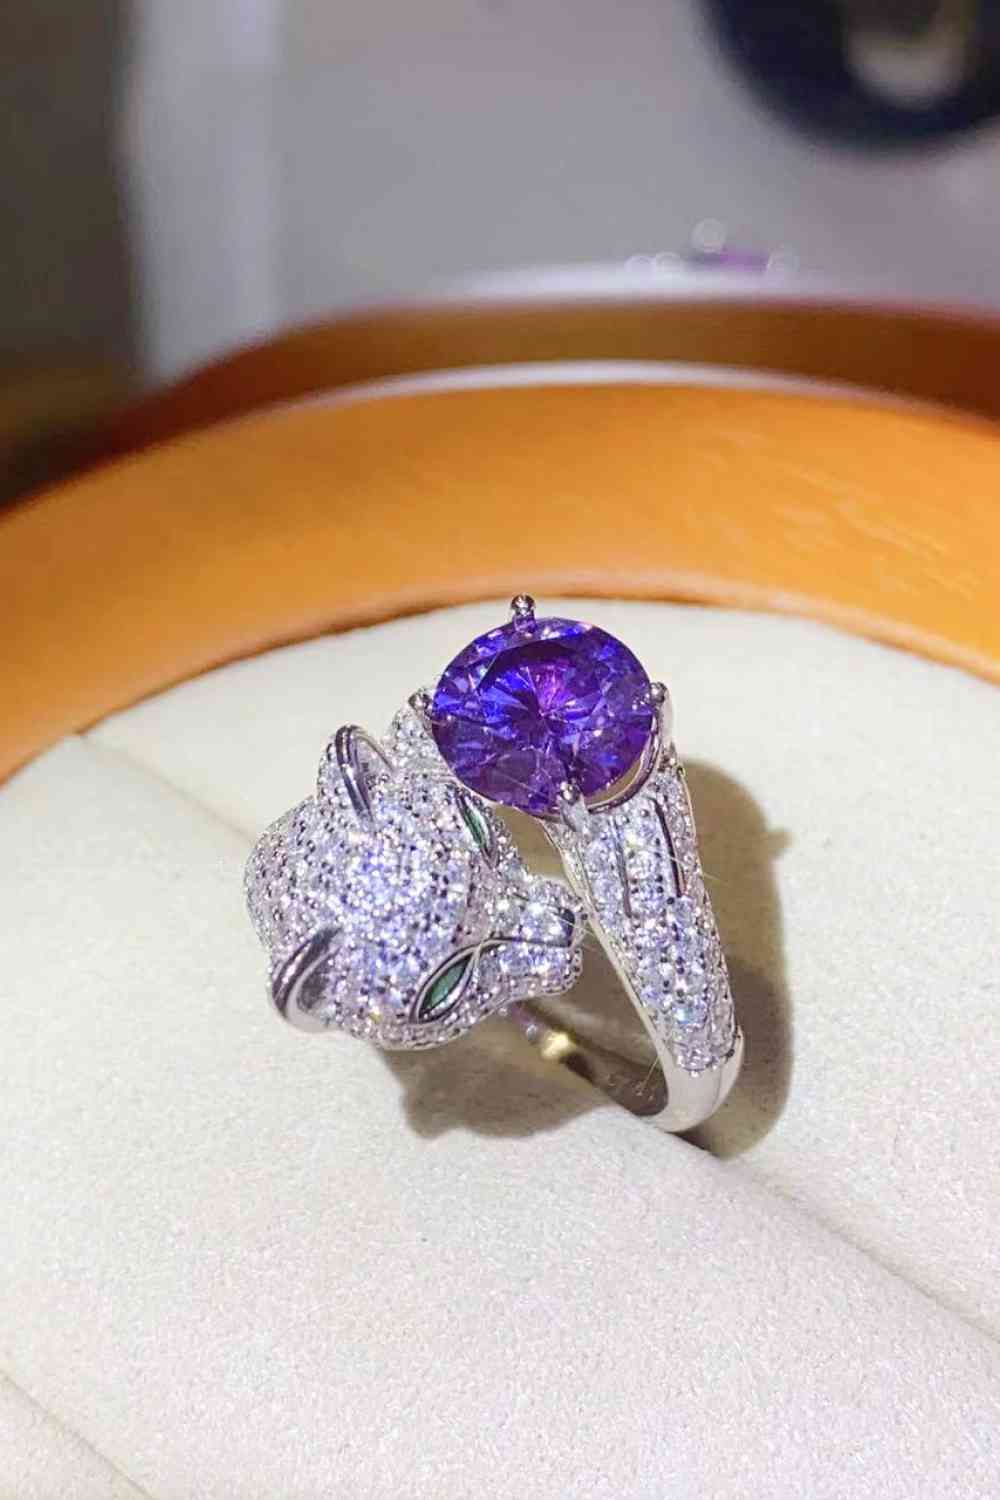 a close up of a ring with a purple stone